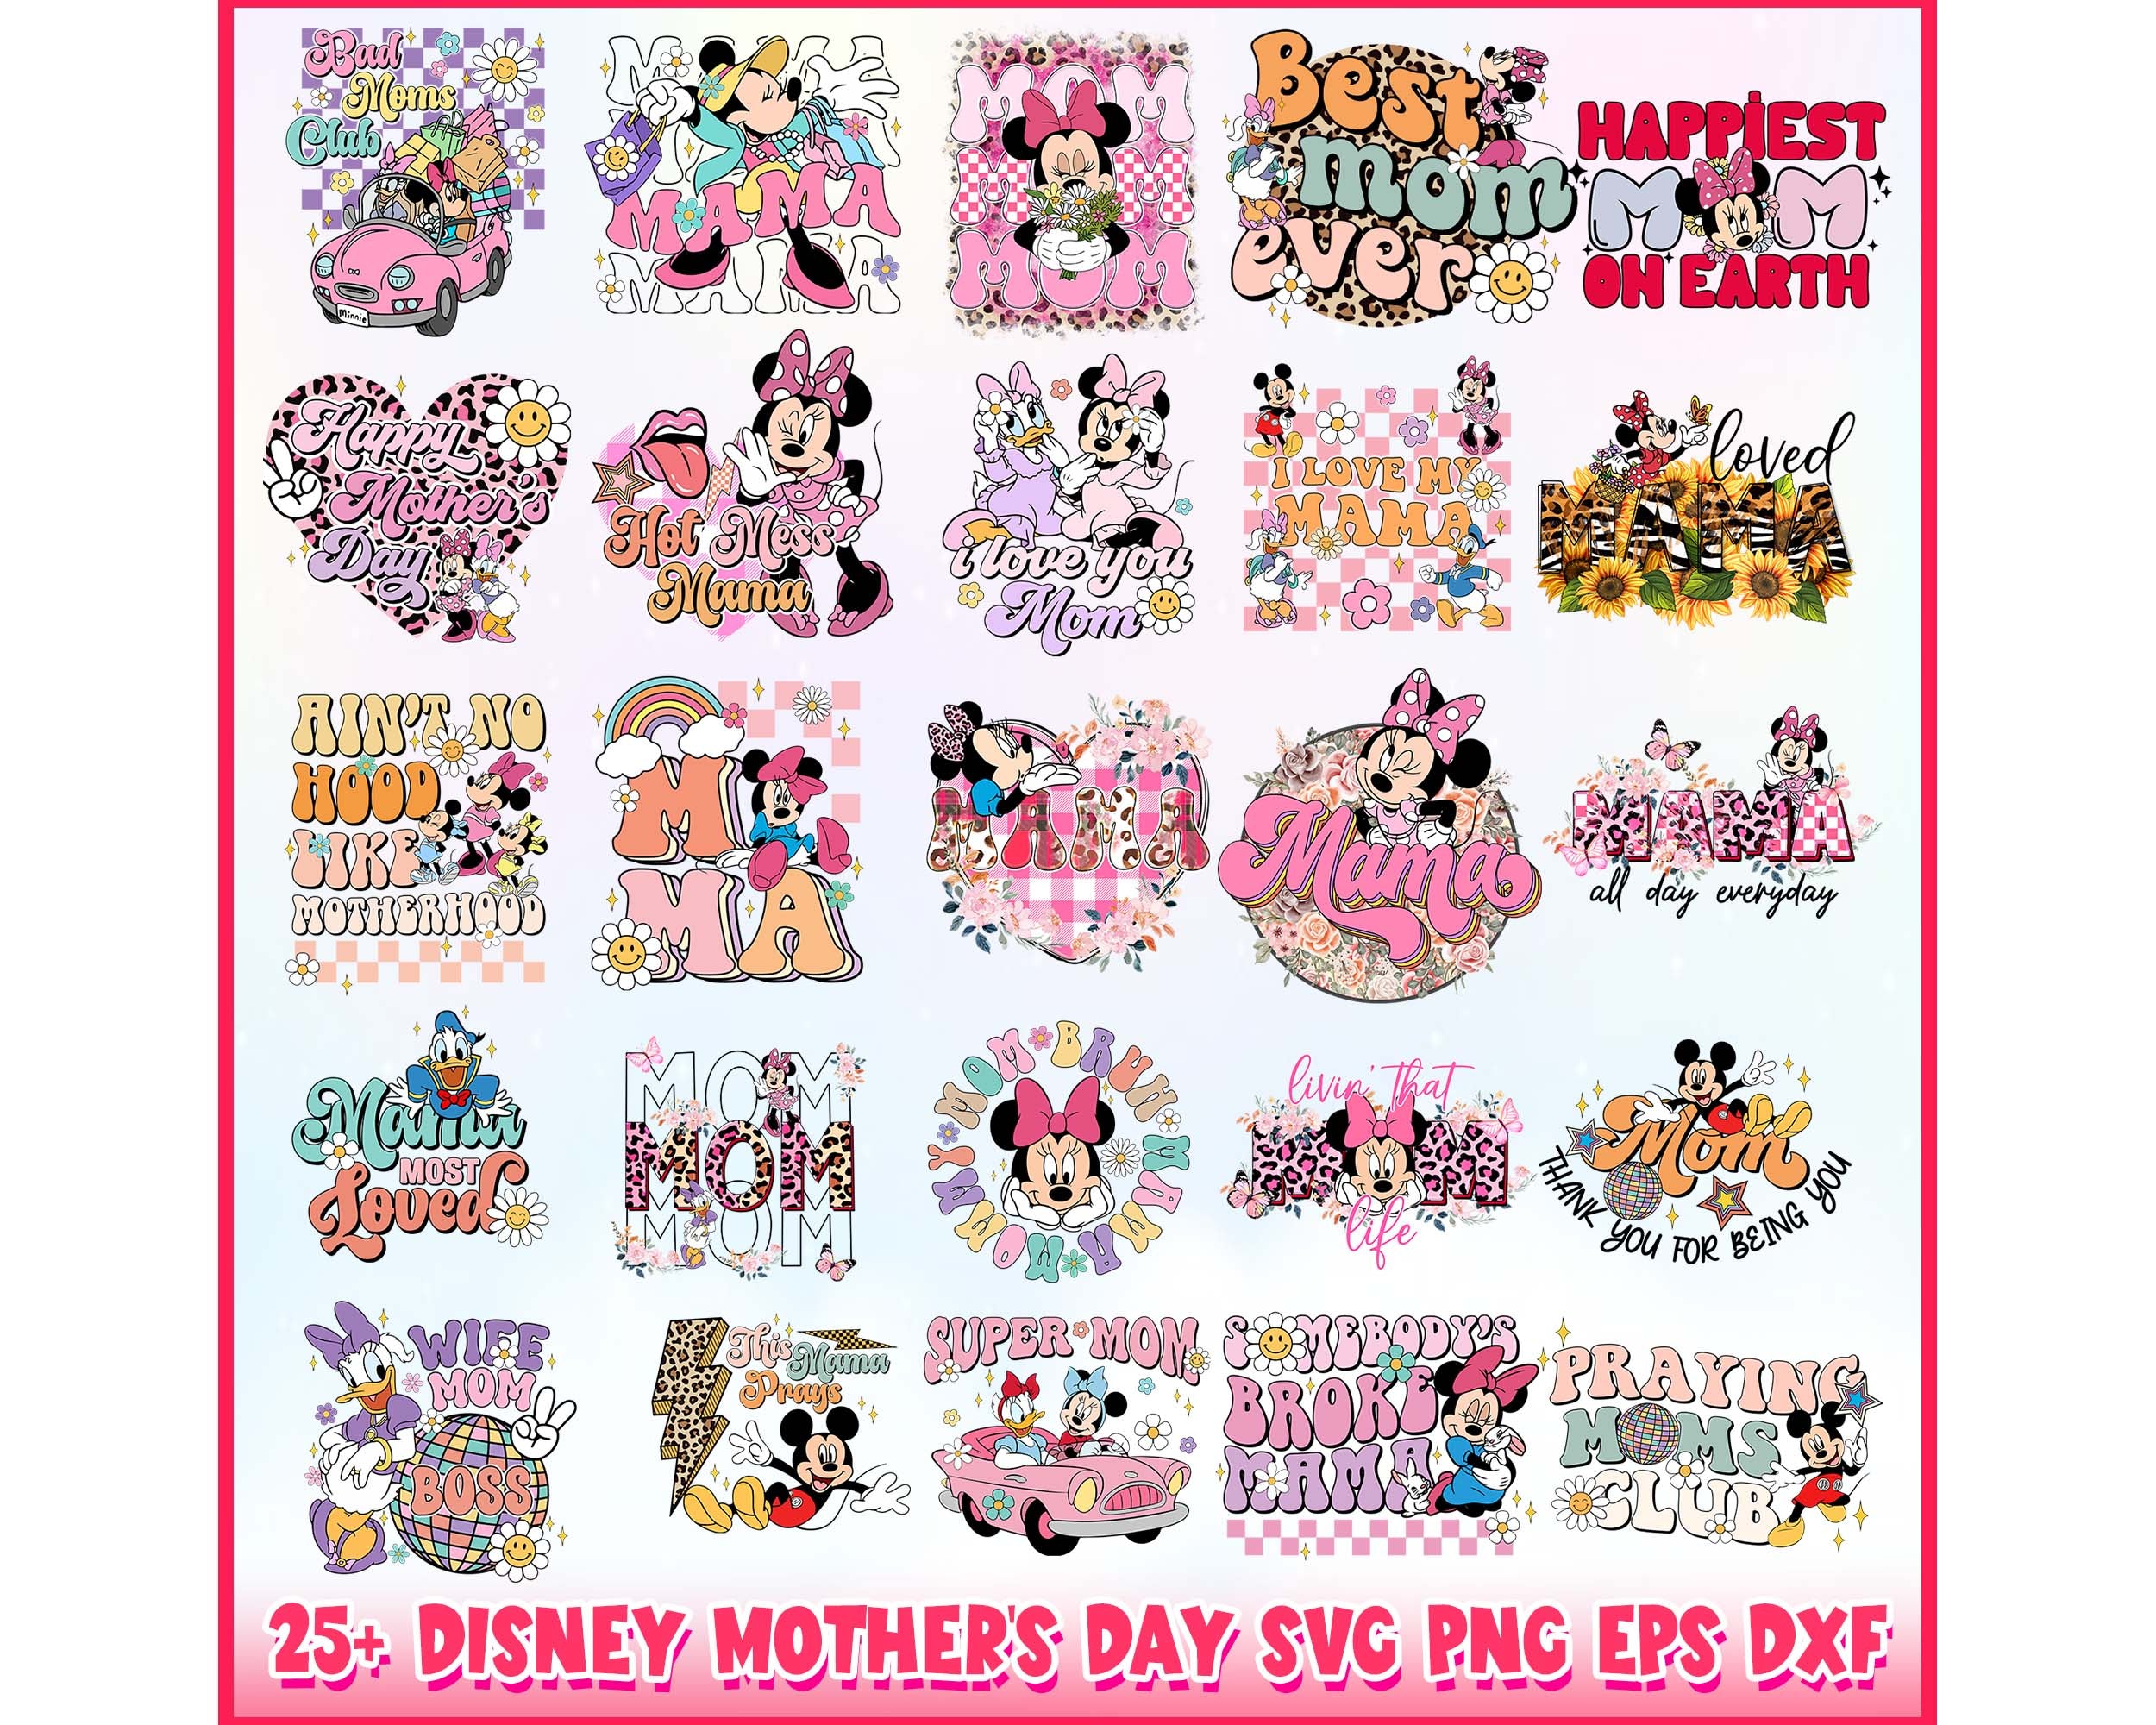 25+ Dis-ney Mother's Day Svg Png Eps Dxf Bundle Instant Download